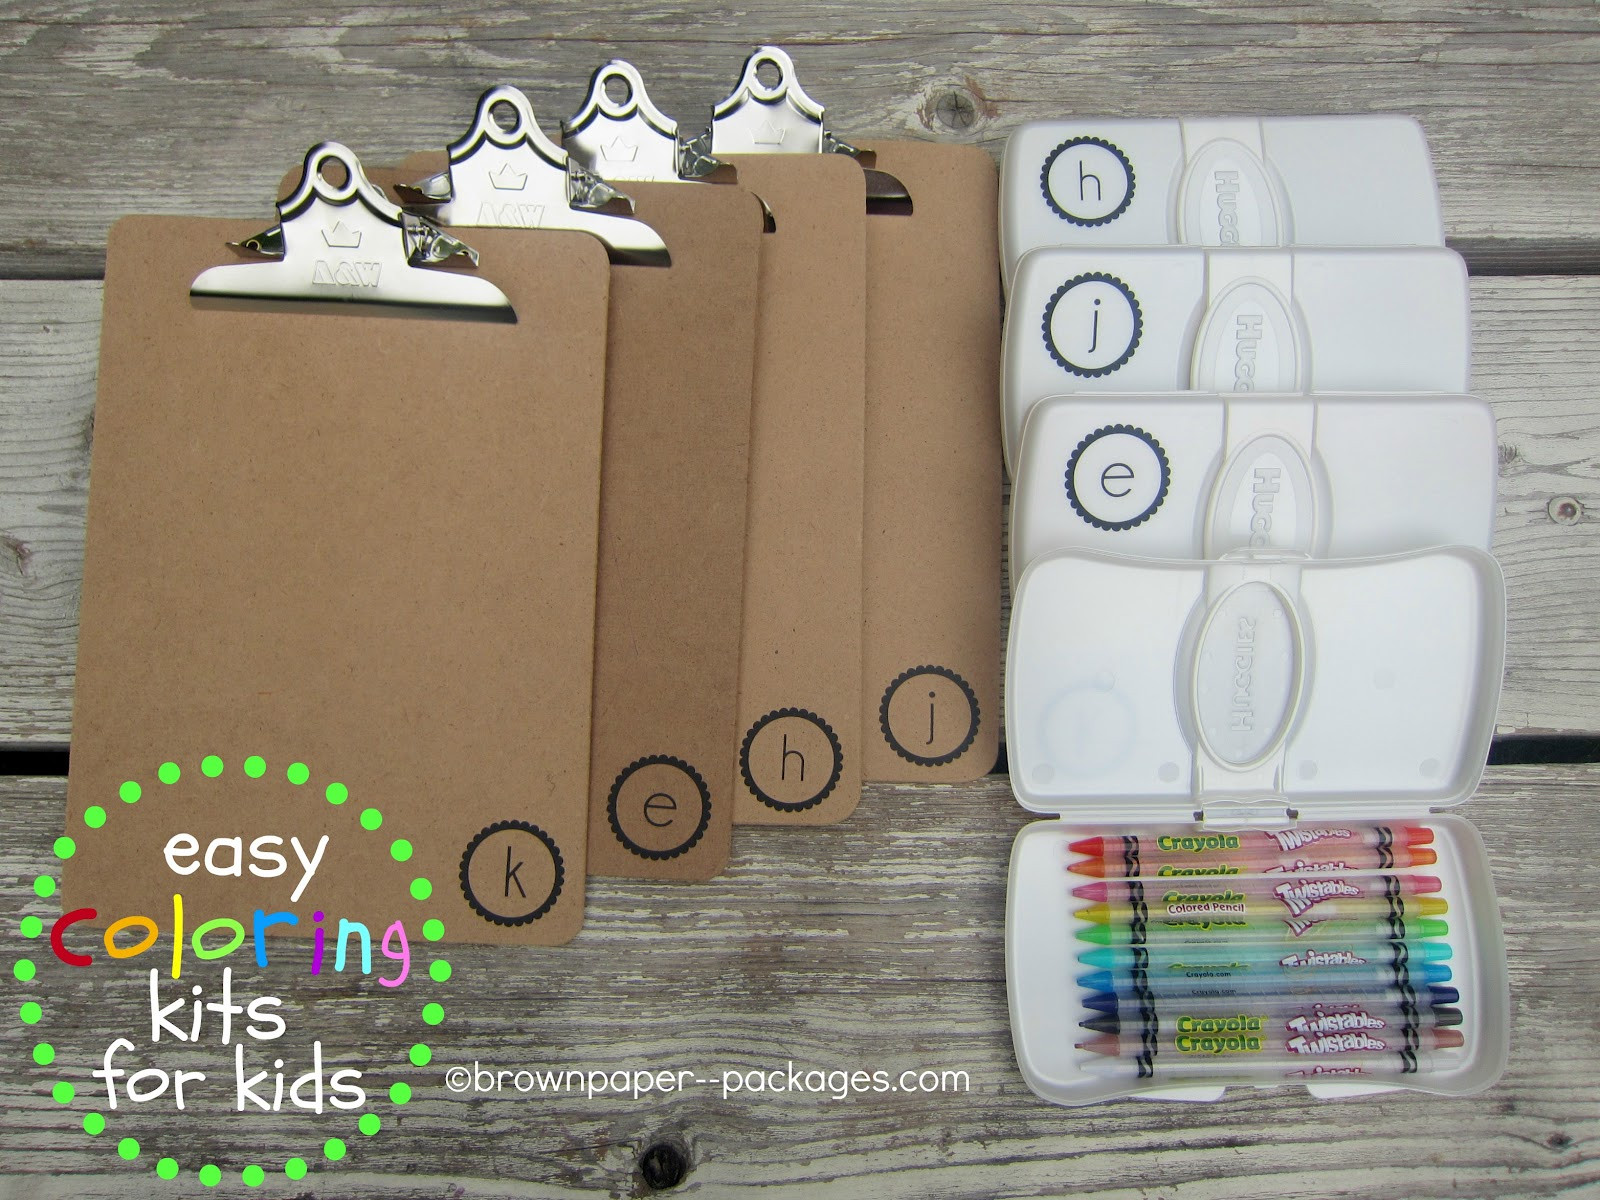 Coloring Kits For Kids
 clipboards wipes cases = easy coloring kits for kids